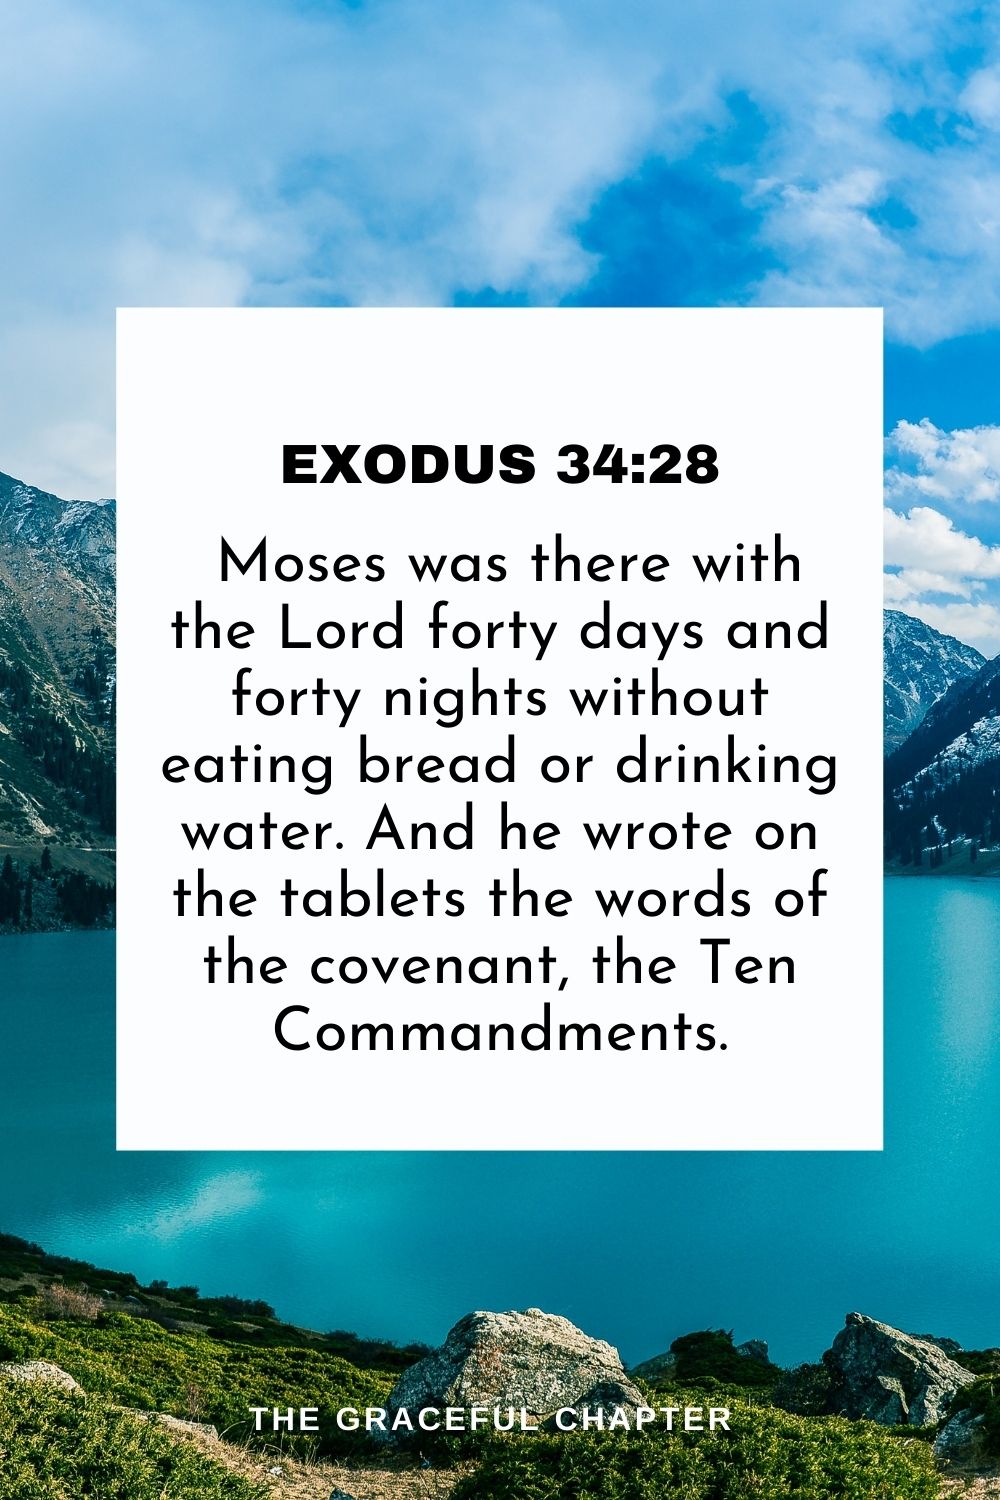 Moses was there with the Lord forty days and forty nights without eating bread or drinking water. And he wrote on the tablets the words of the covenant, the Ten Commandments. Exodus 34:28